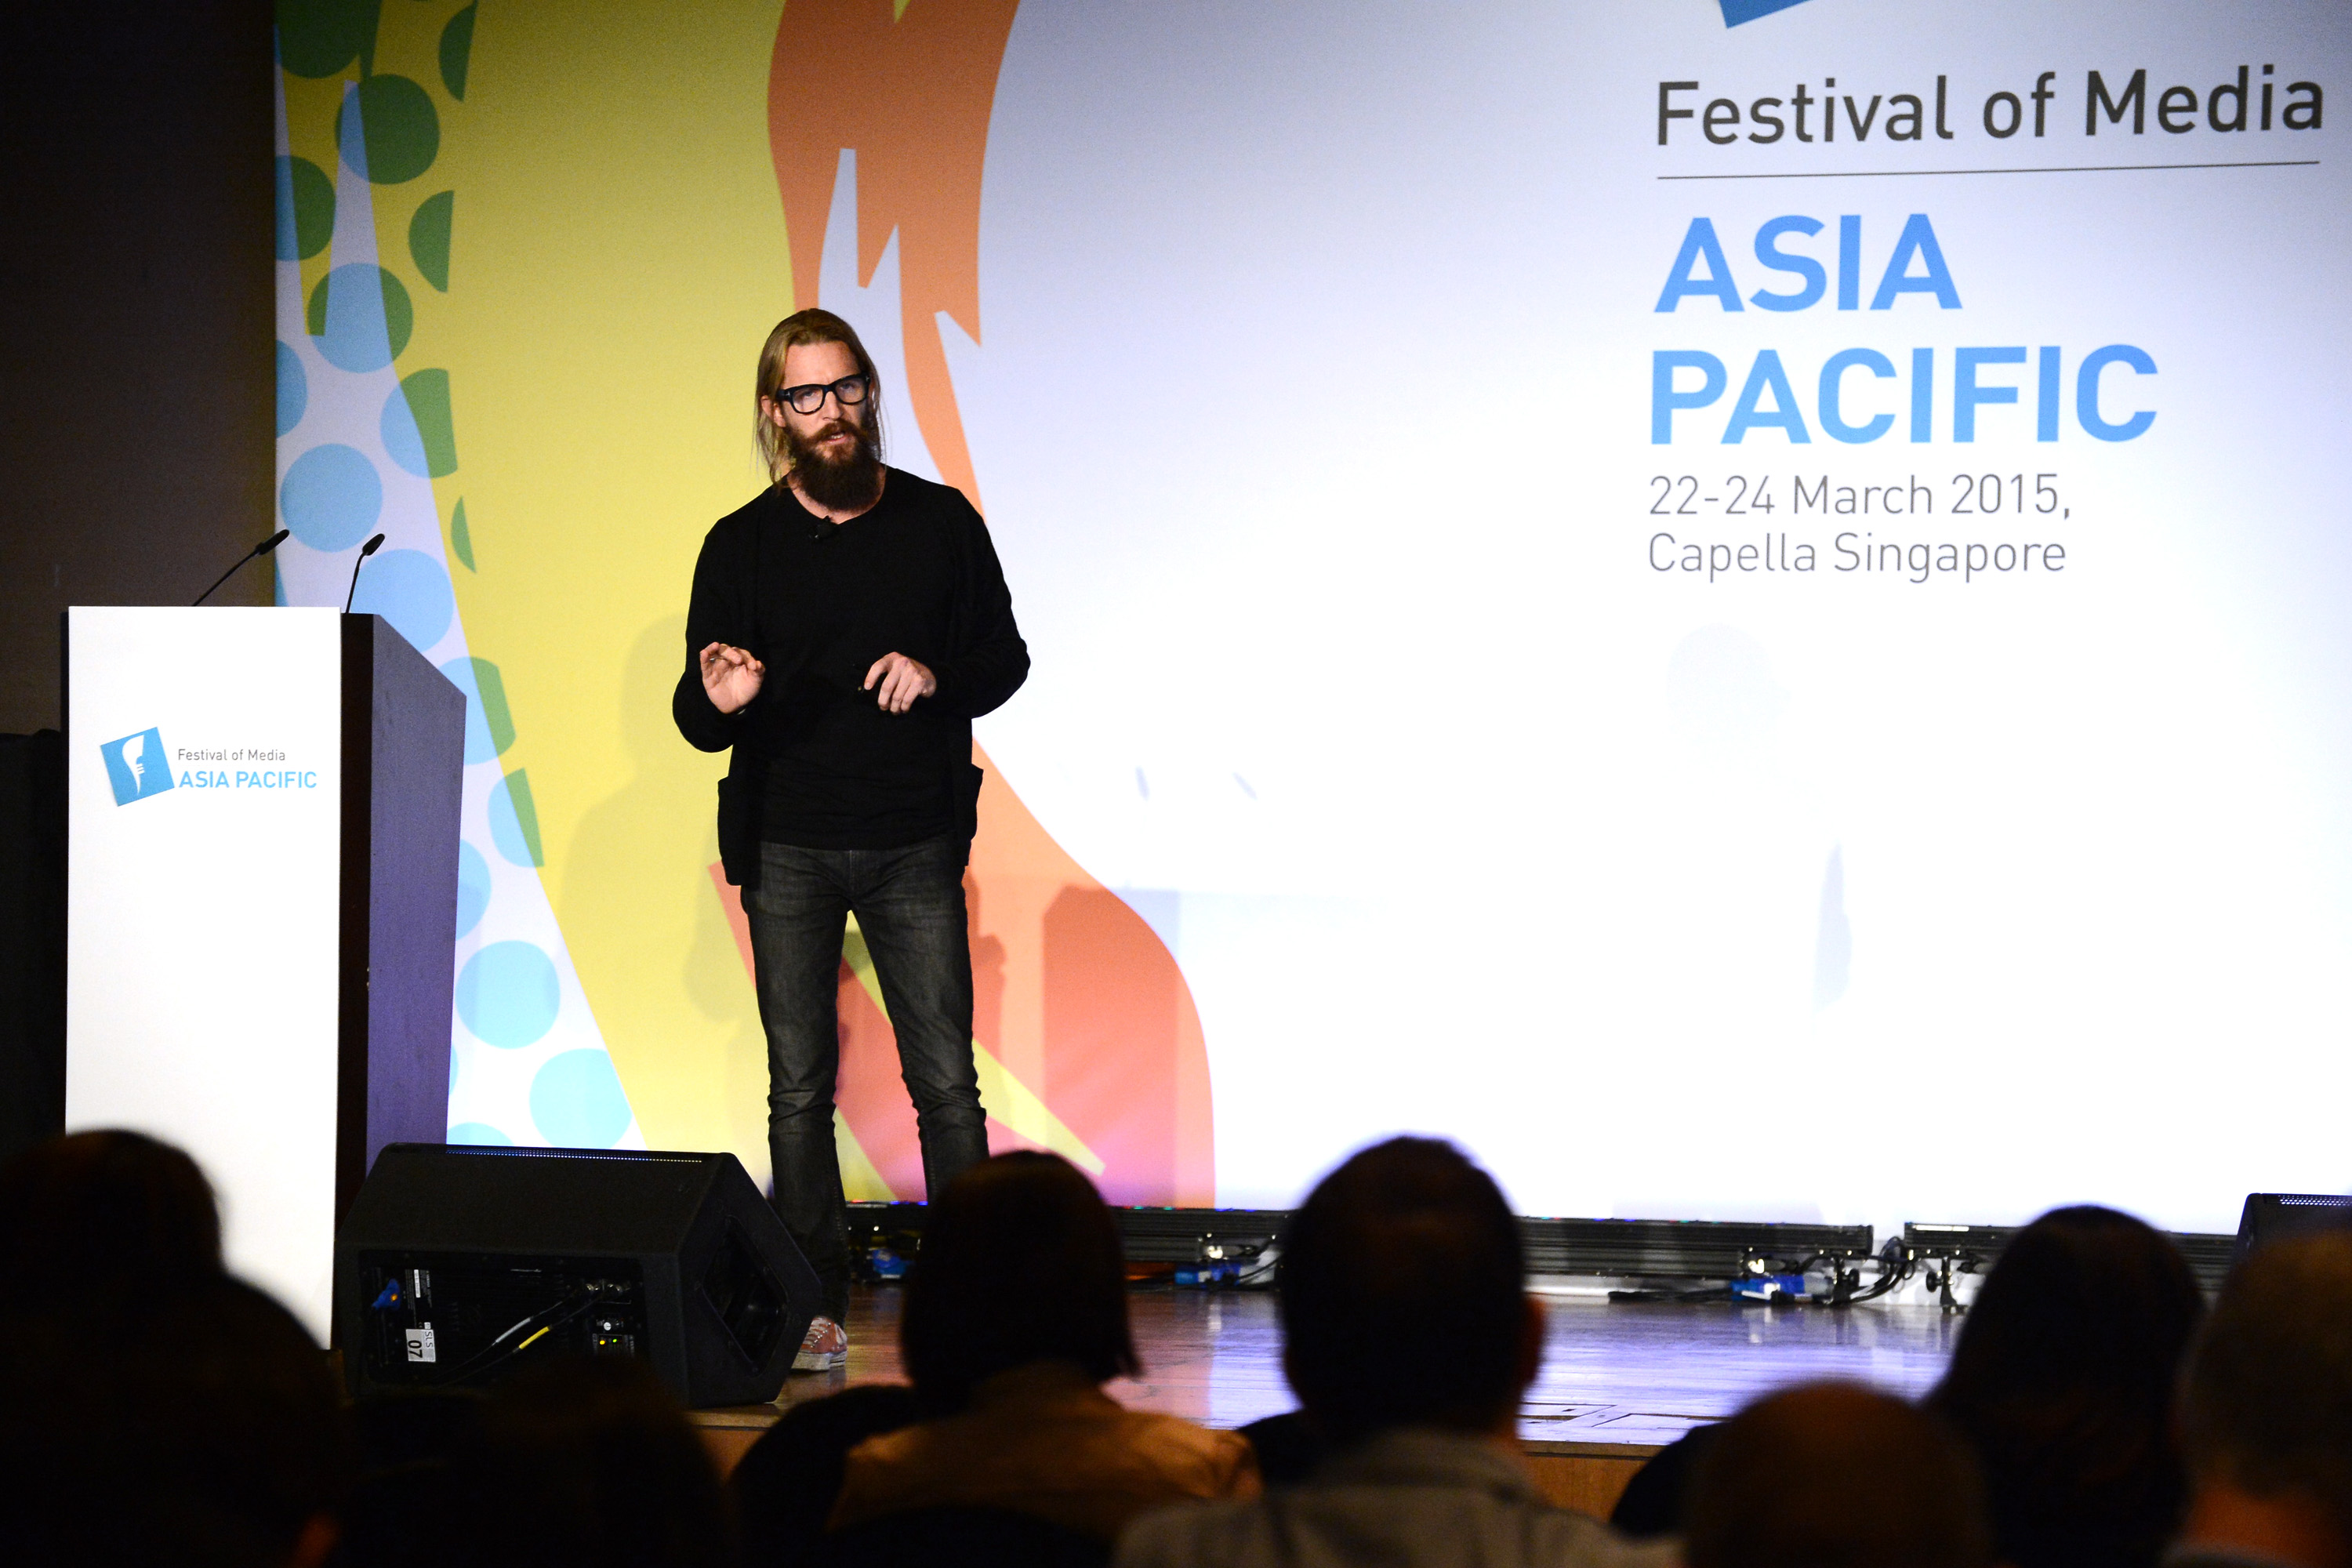 Jonathan Oliver, Global Head of Innovation at Microsoft Advertising, delivering his keynote at Festival of Media Asia Pacific 2015